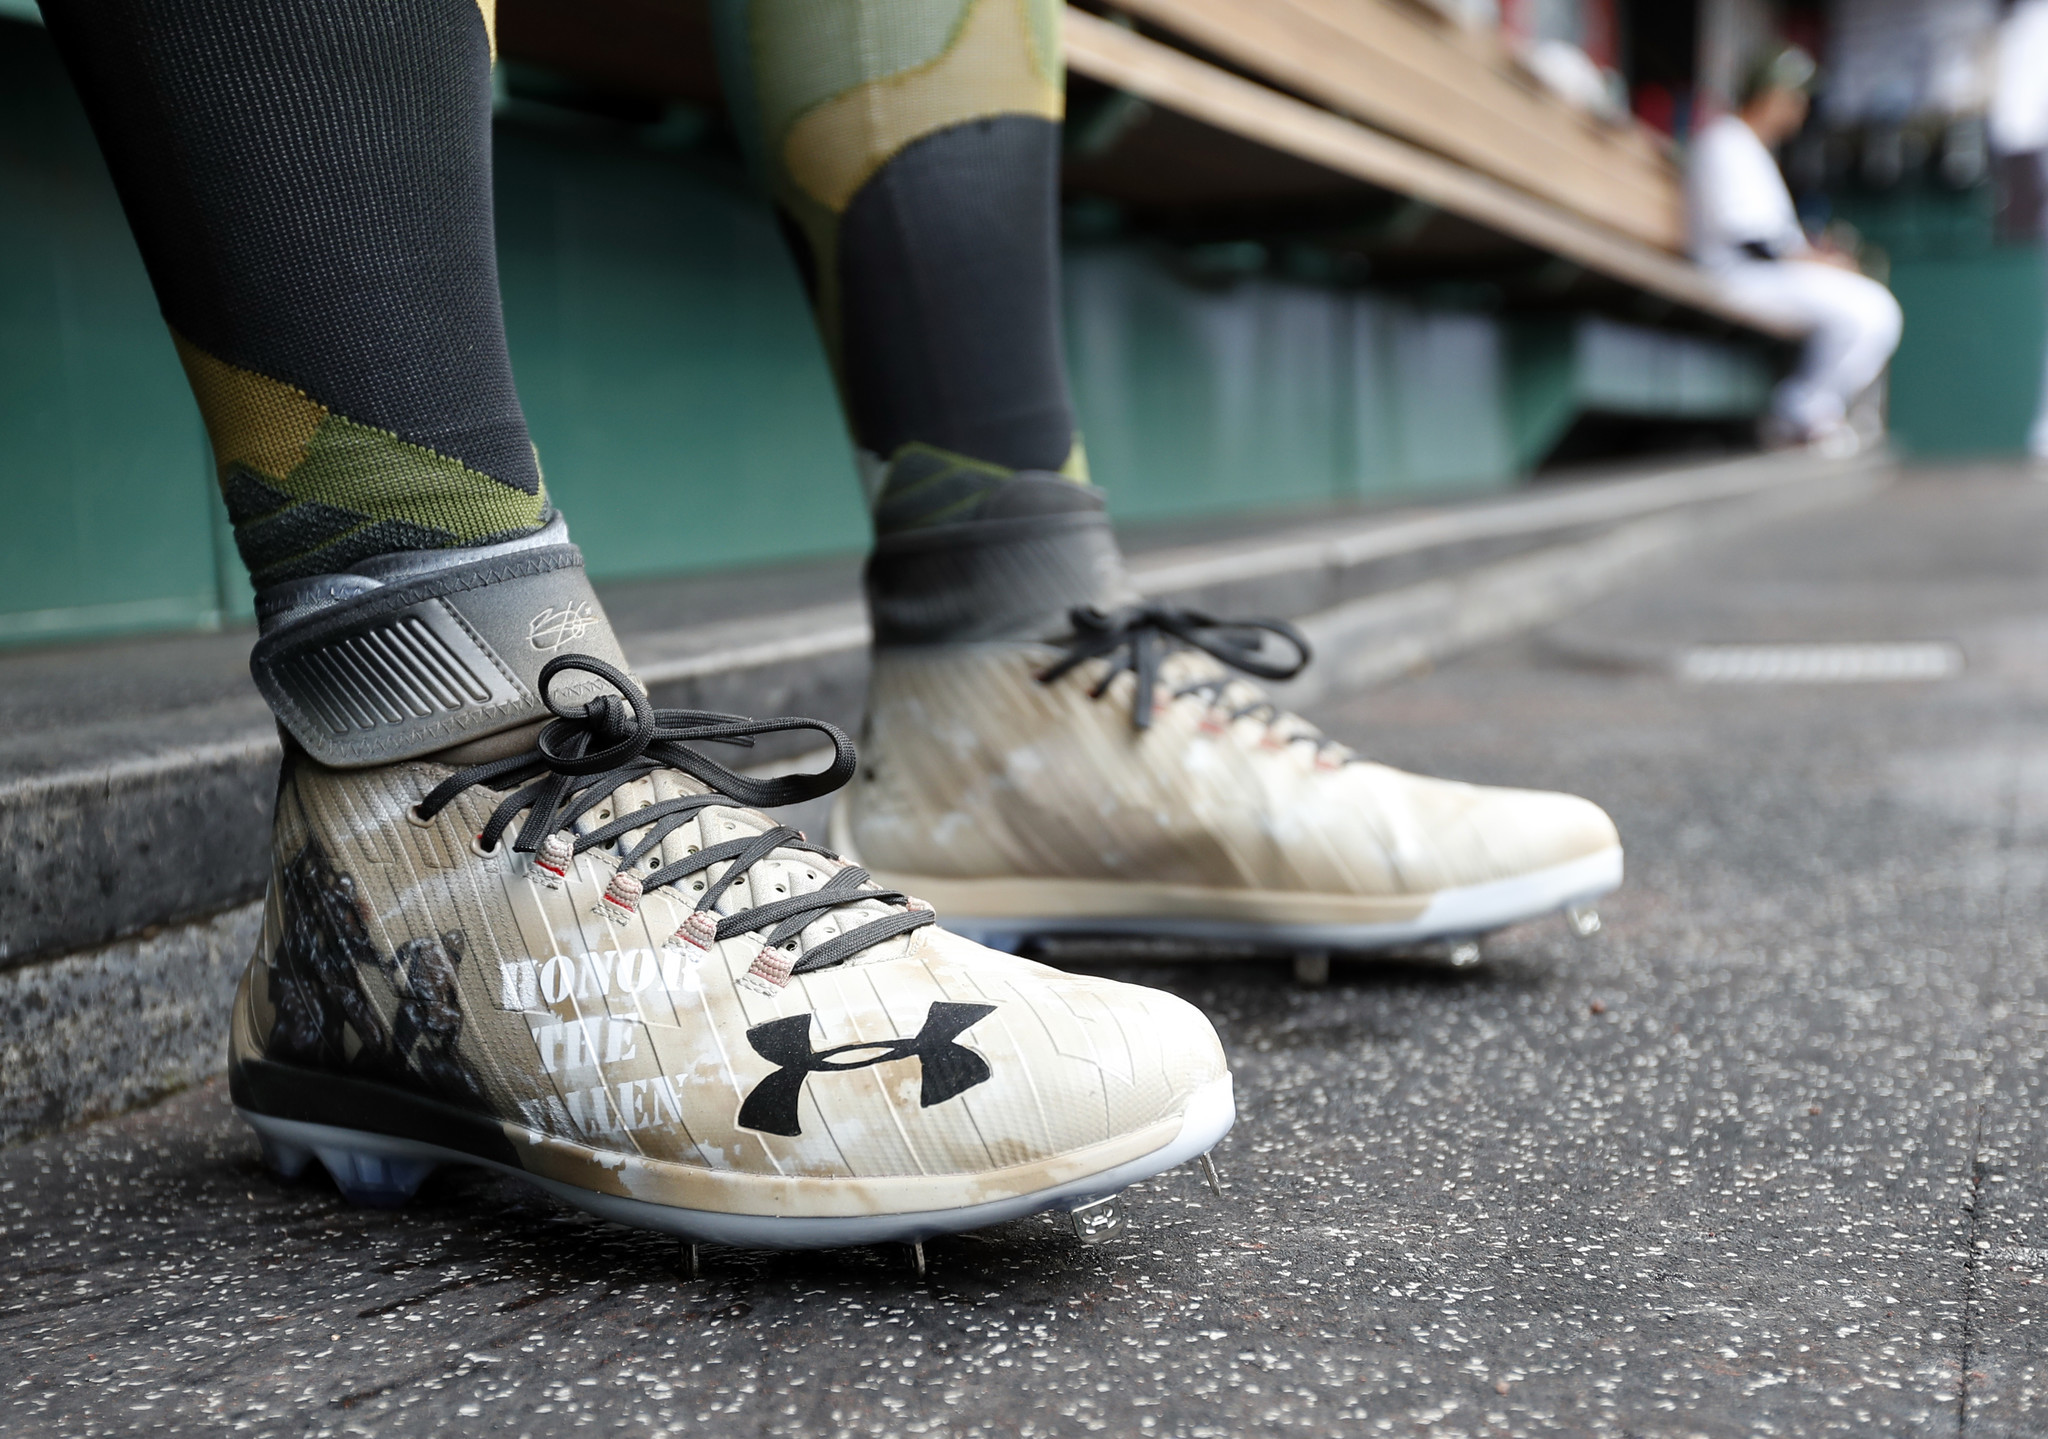 Bryce harper under armour cleats